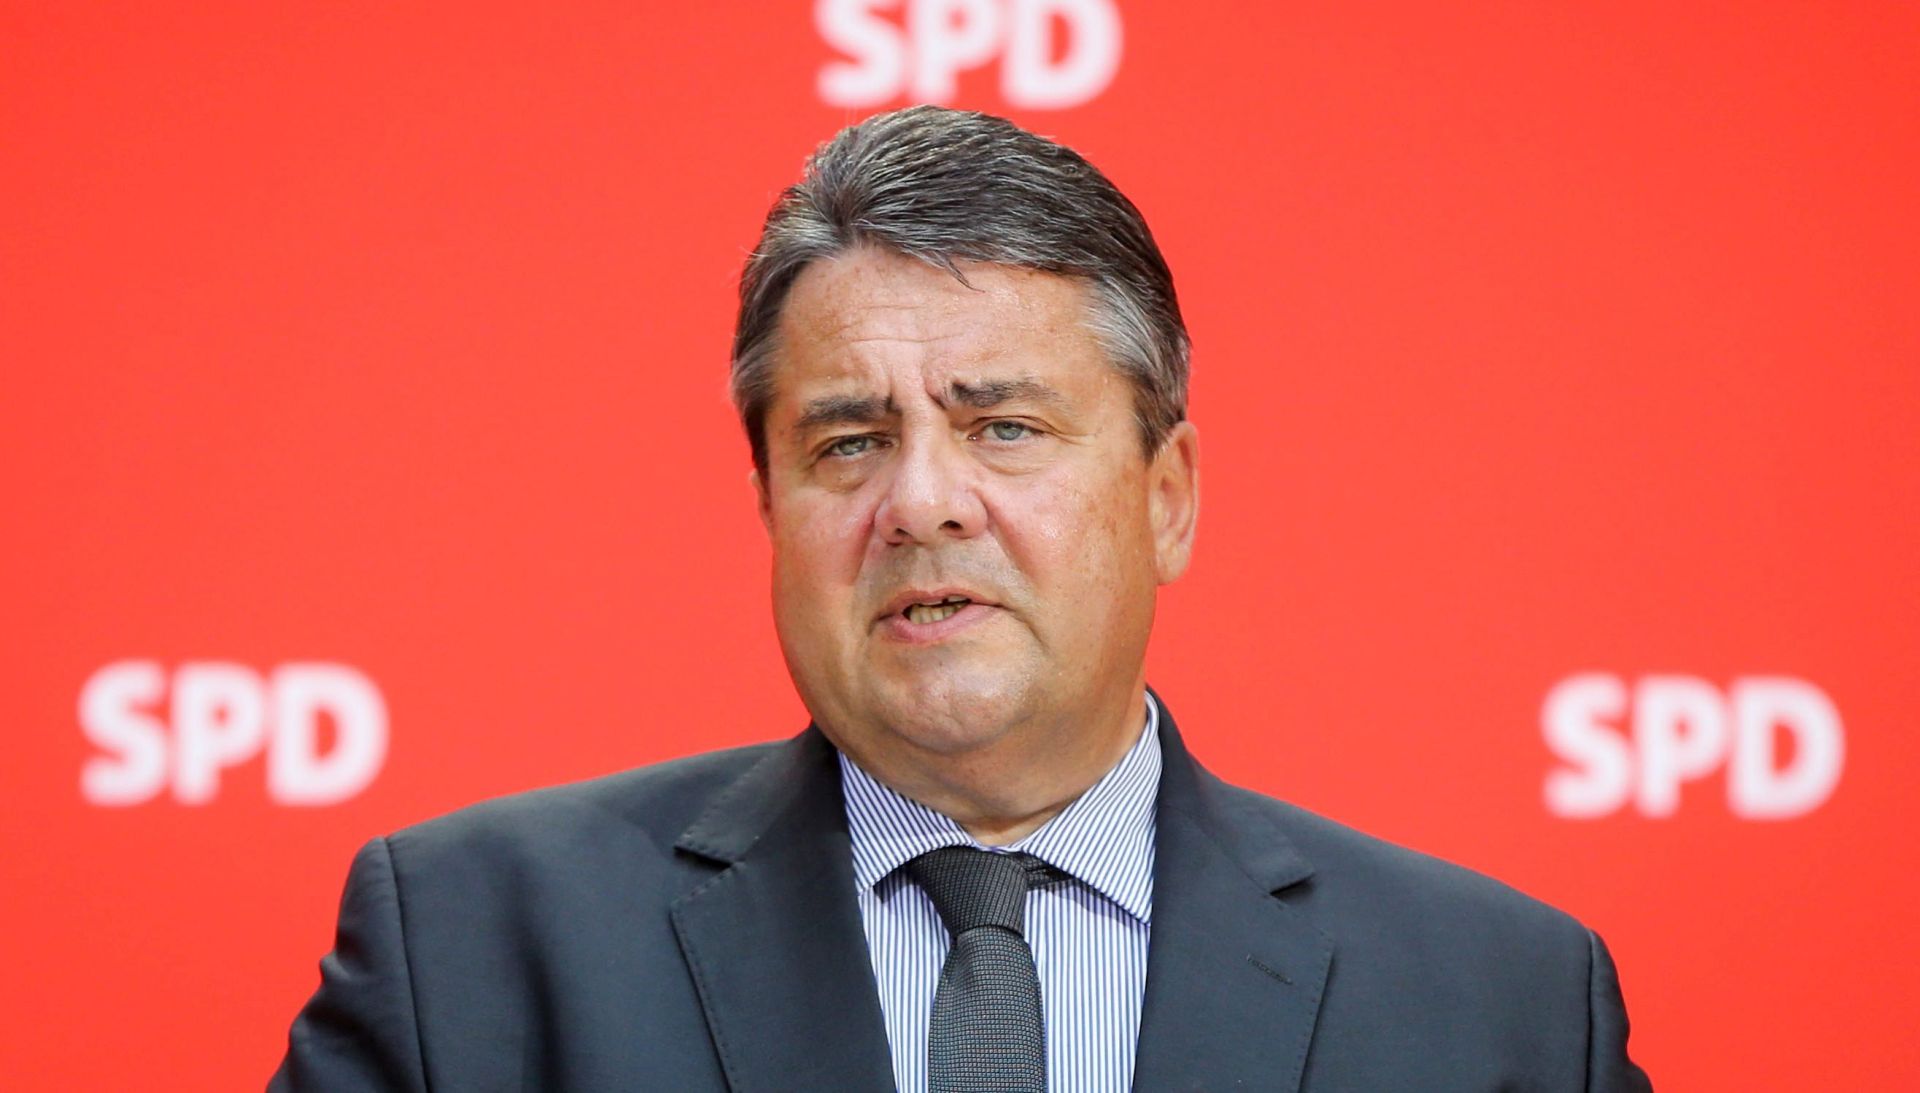 epa05747040 (FILE) - The file picture dated 06 June 2016 shows Sigmar Gabriel, German Economy Minister and leader of Germany's Social Democratic Party (SPD), delivering a speech in Berlin, Germany. According to media reports on 24 January 2017, Martin Schulz has been suggested to run as the Social Democrats candidate for German chancellor instead of the Leader of the Social Democratic Party of Germany (SPD) and Vice Chancellor Sigmar Gabriel. Schulz is meant to challenge conservative Chancellor Angela Merkel in the September 2017 election.  EPA/ KAY NIETFELD  GERMANY OUT